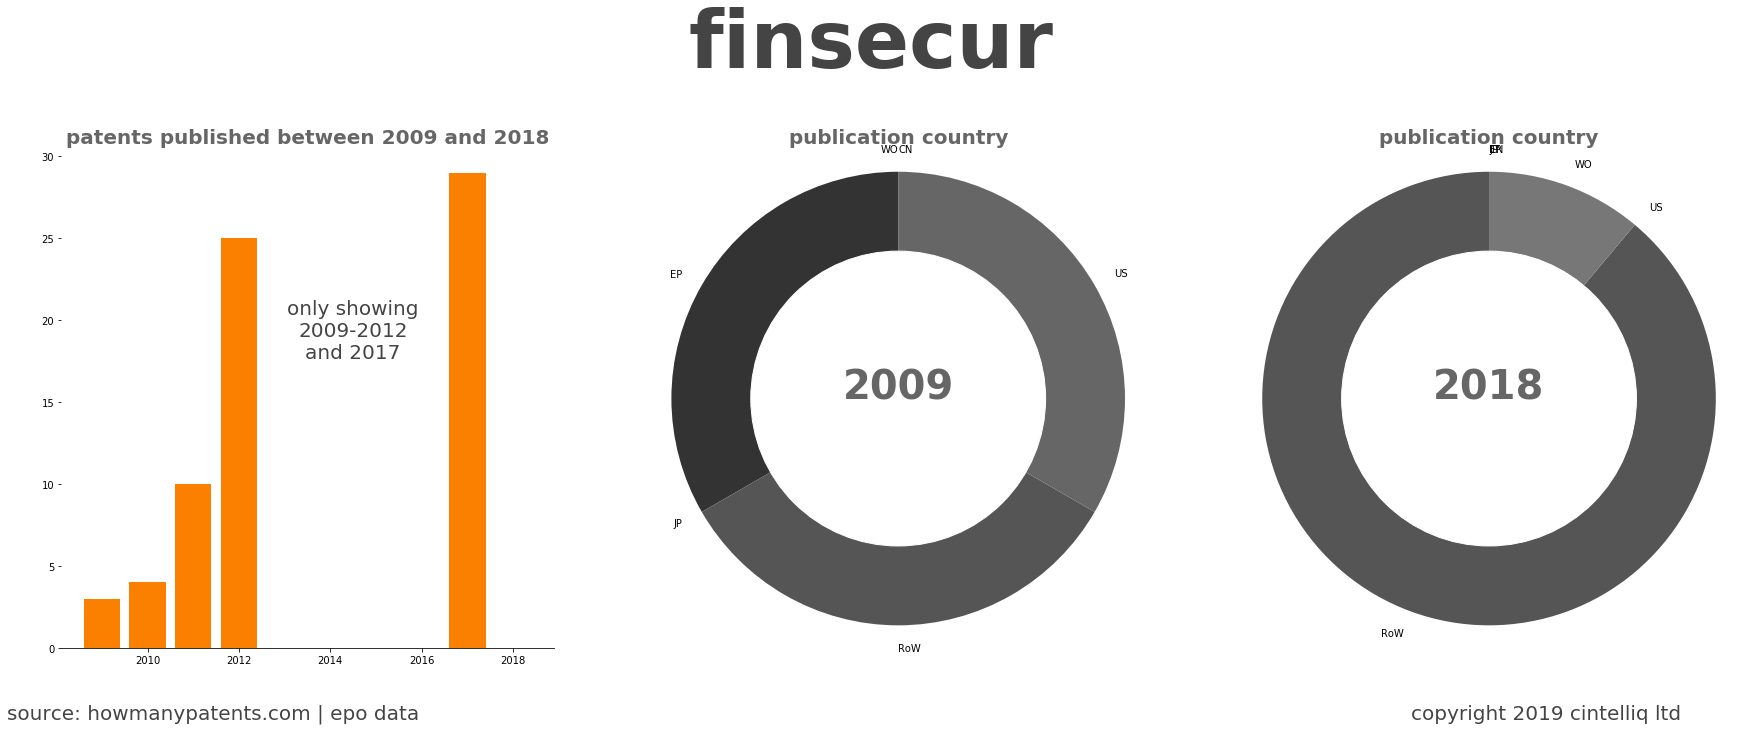 summary of patents for Finsecur